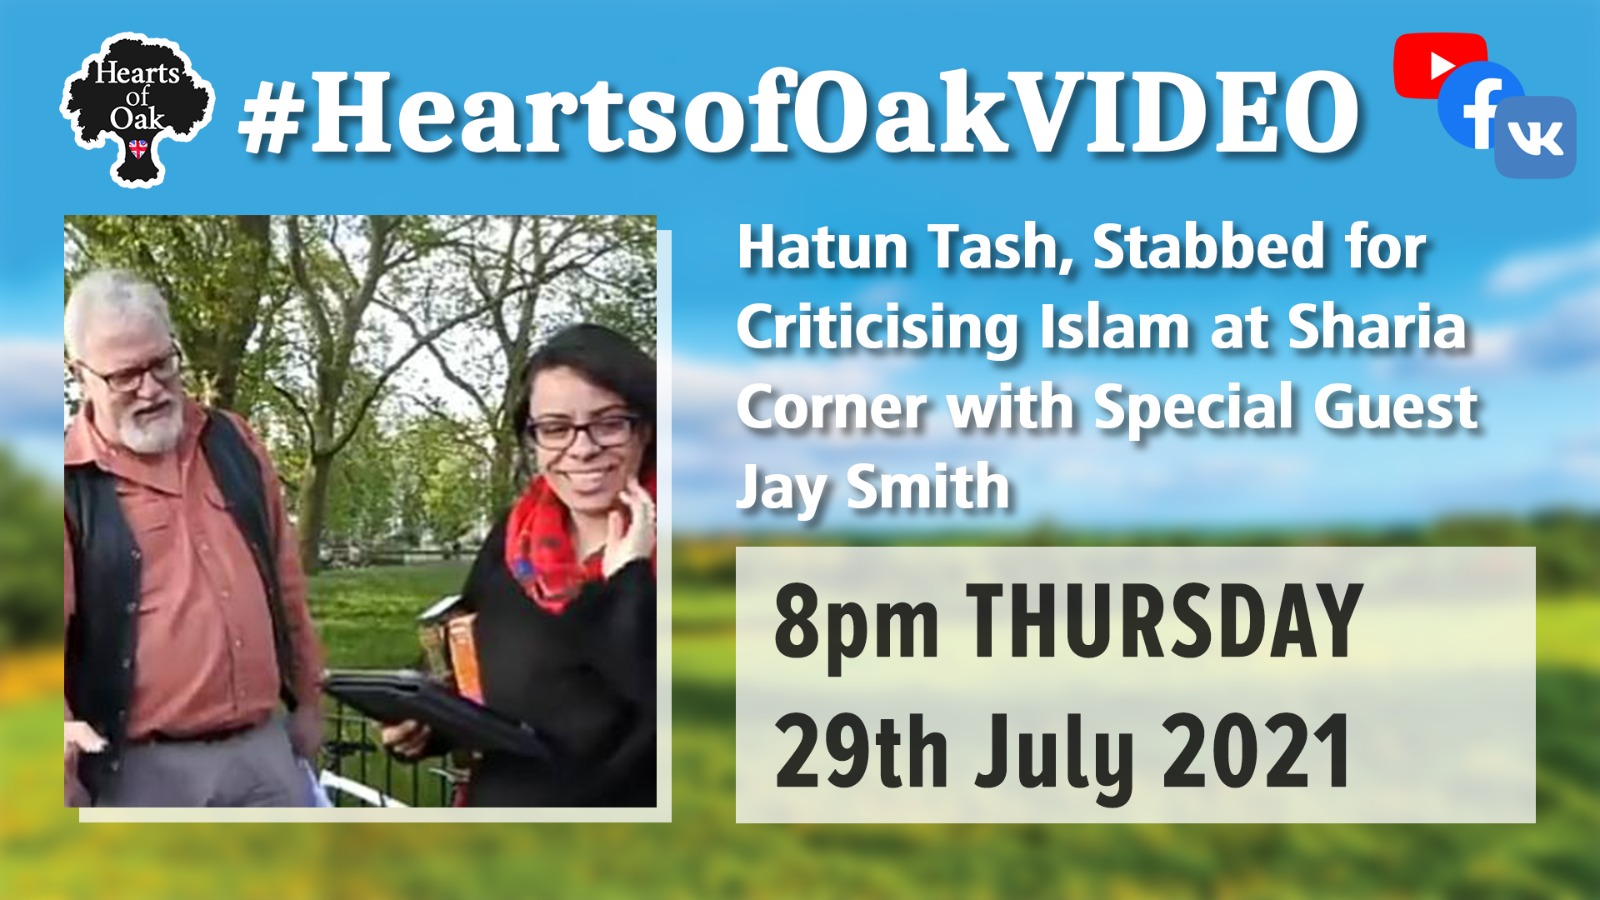 Hatun Tash, Stabbed for Criticising Islam at Sharia Corner with special guest Jay Smith